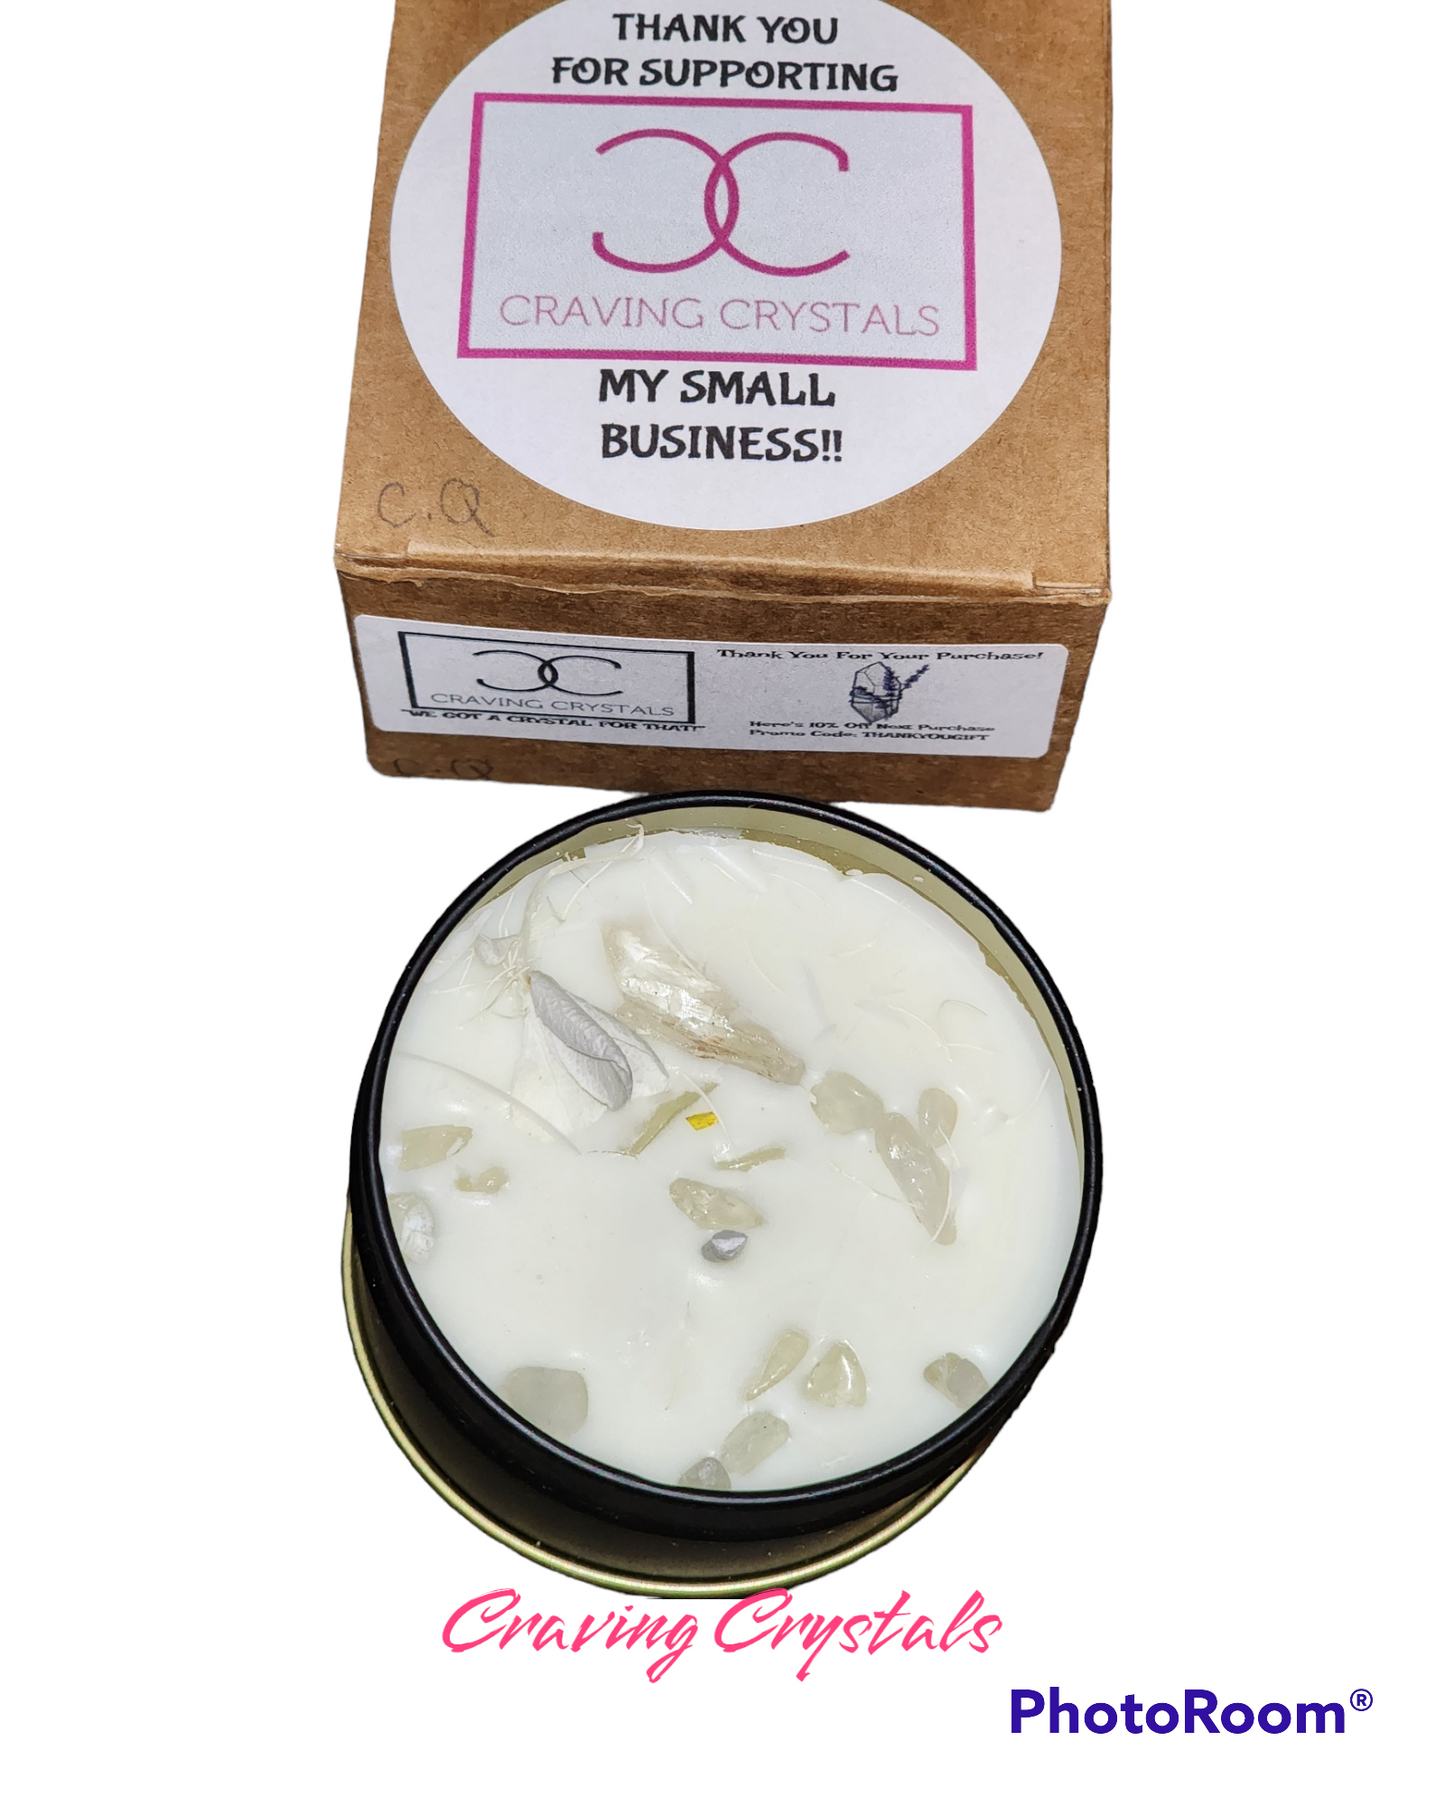 Crystals in a Candle 4oz - MYSTERY OR YOU CHOOSE - Reiki Charged